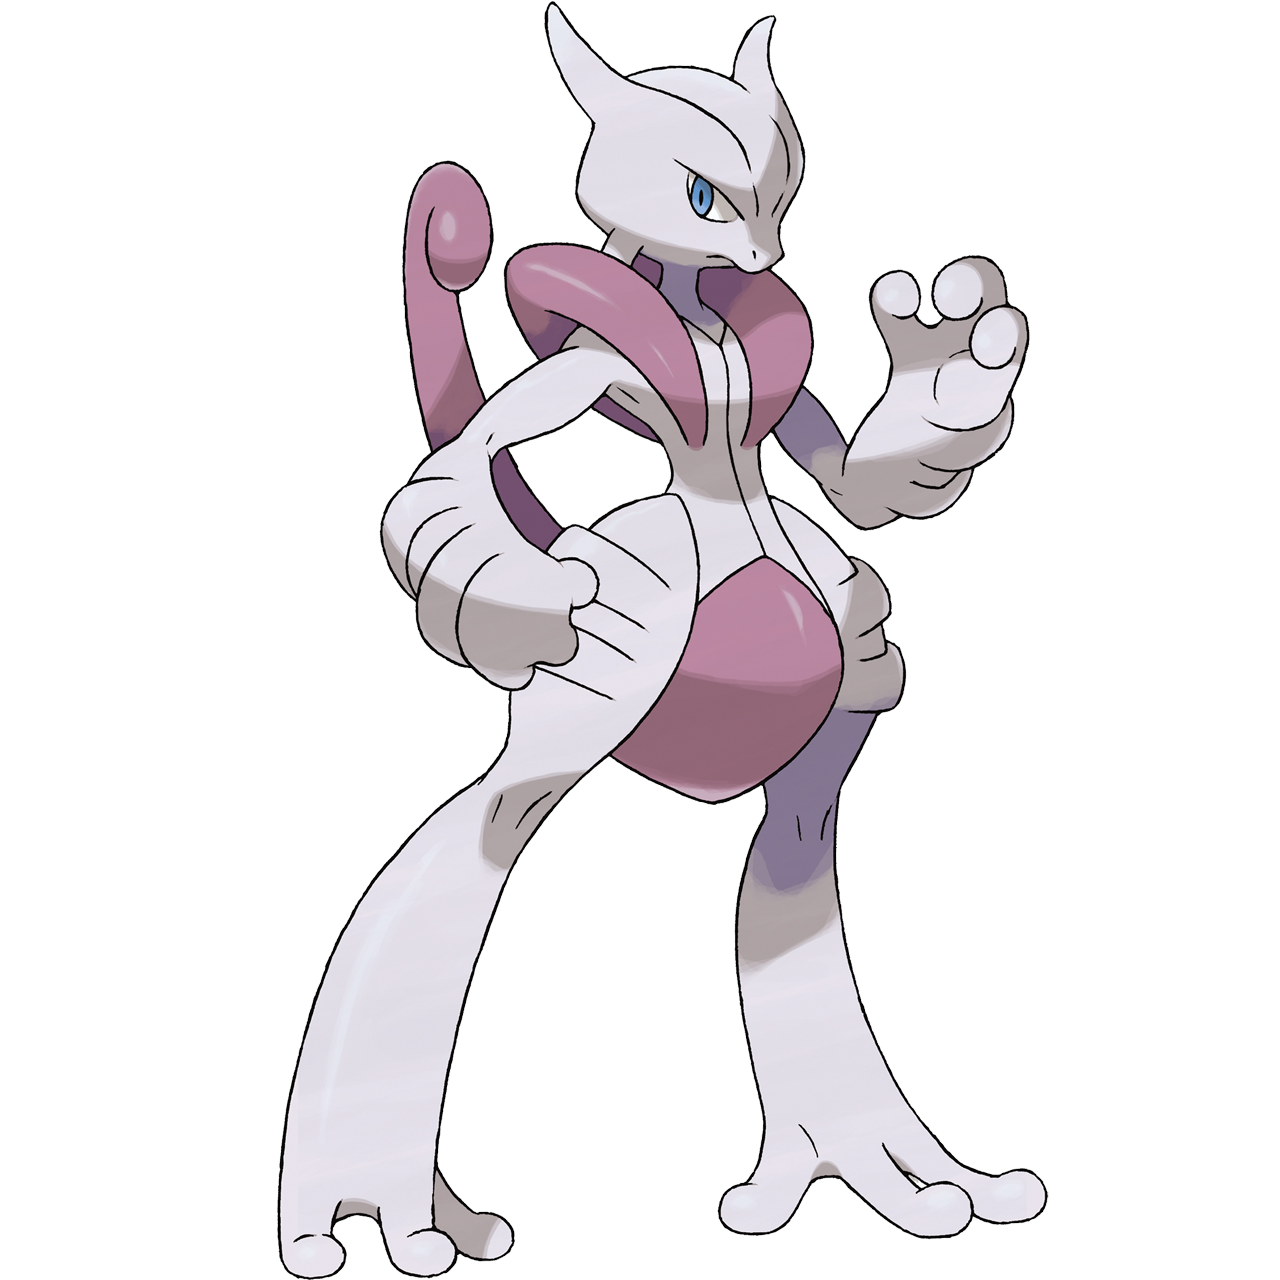 They were teased 2 years ago: Pokemon GO fans wonder about Mega Mewtwo  forms